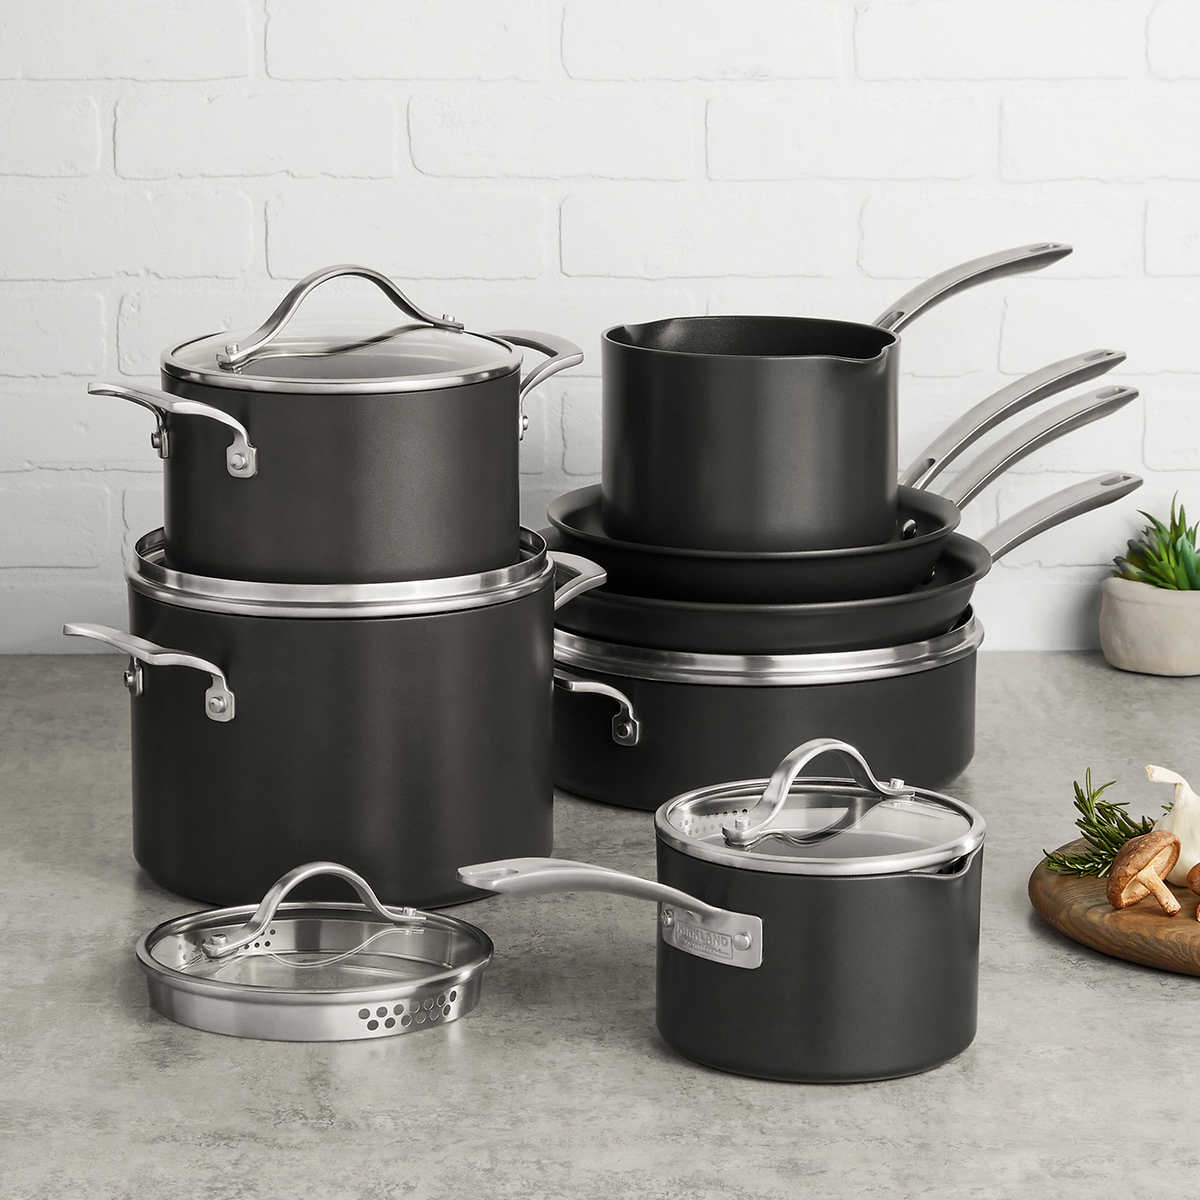 Kirkland Signature (Costco) 13 piece Stainless Steel tri-ply clad Cookware  Review - Consumer Reports